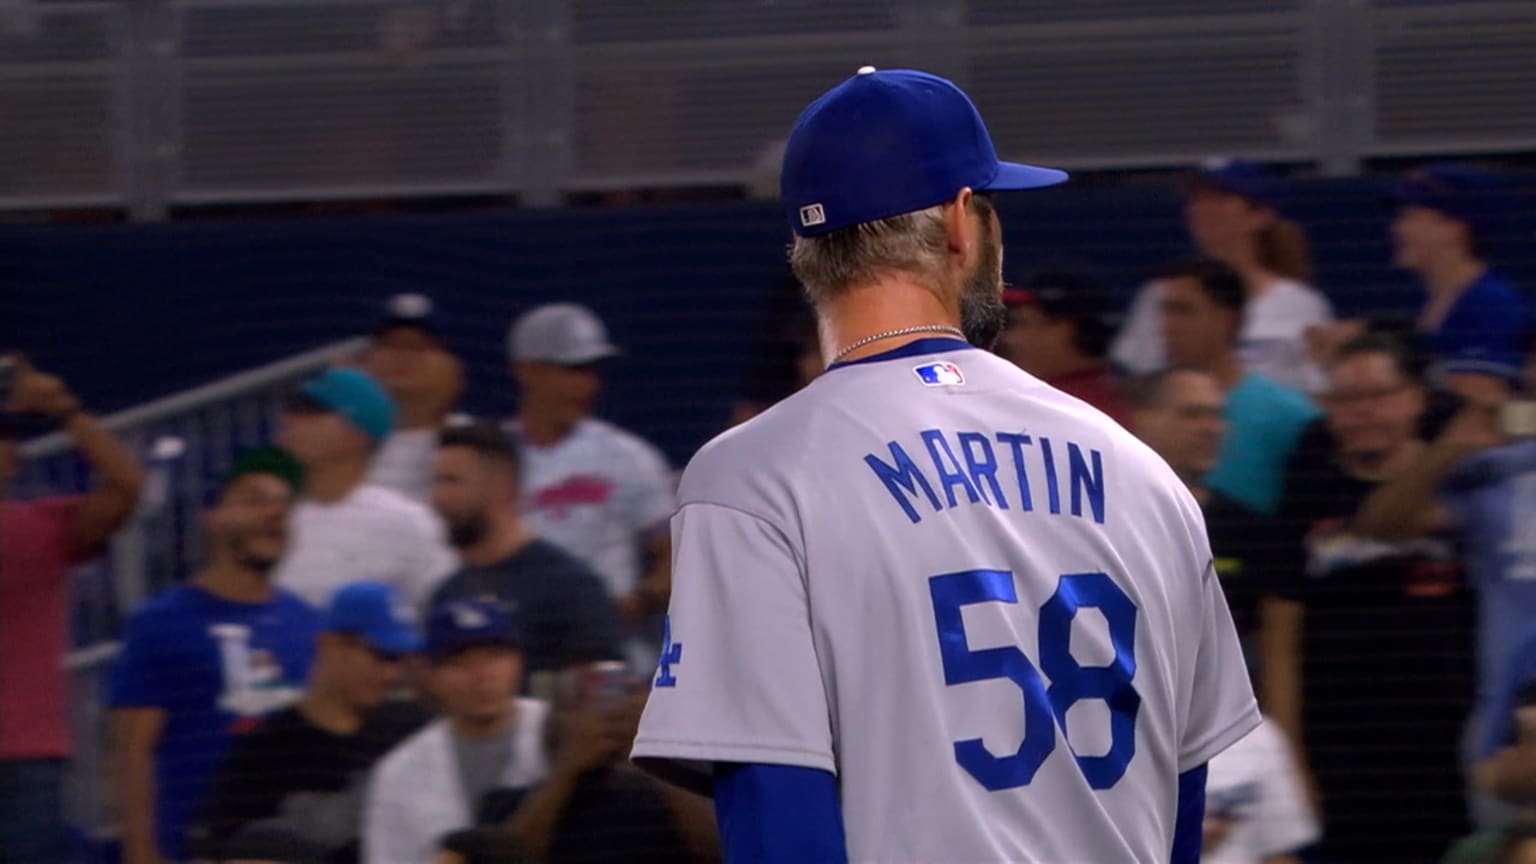 Autographed and Game-Used Brooklyn Dodgers Jersey: Chris Martin #58 (LAD@KC  8/13/22) - Size 48